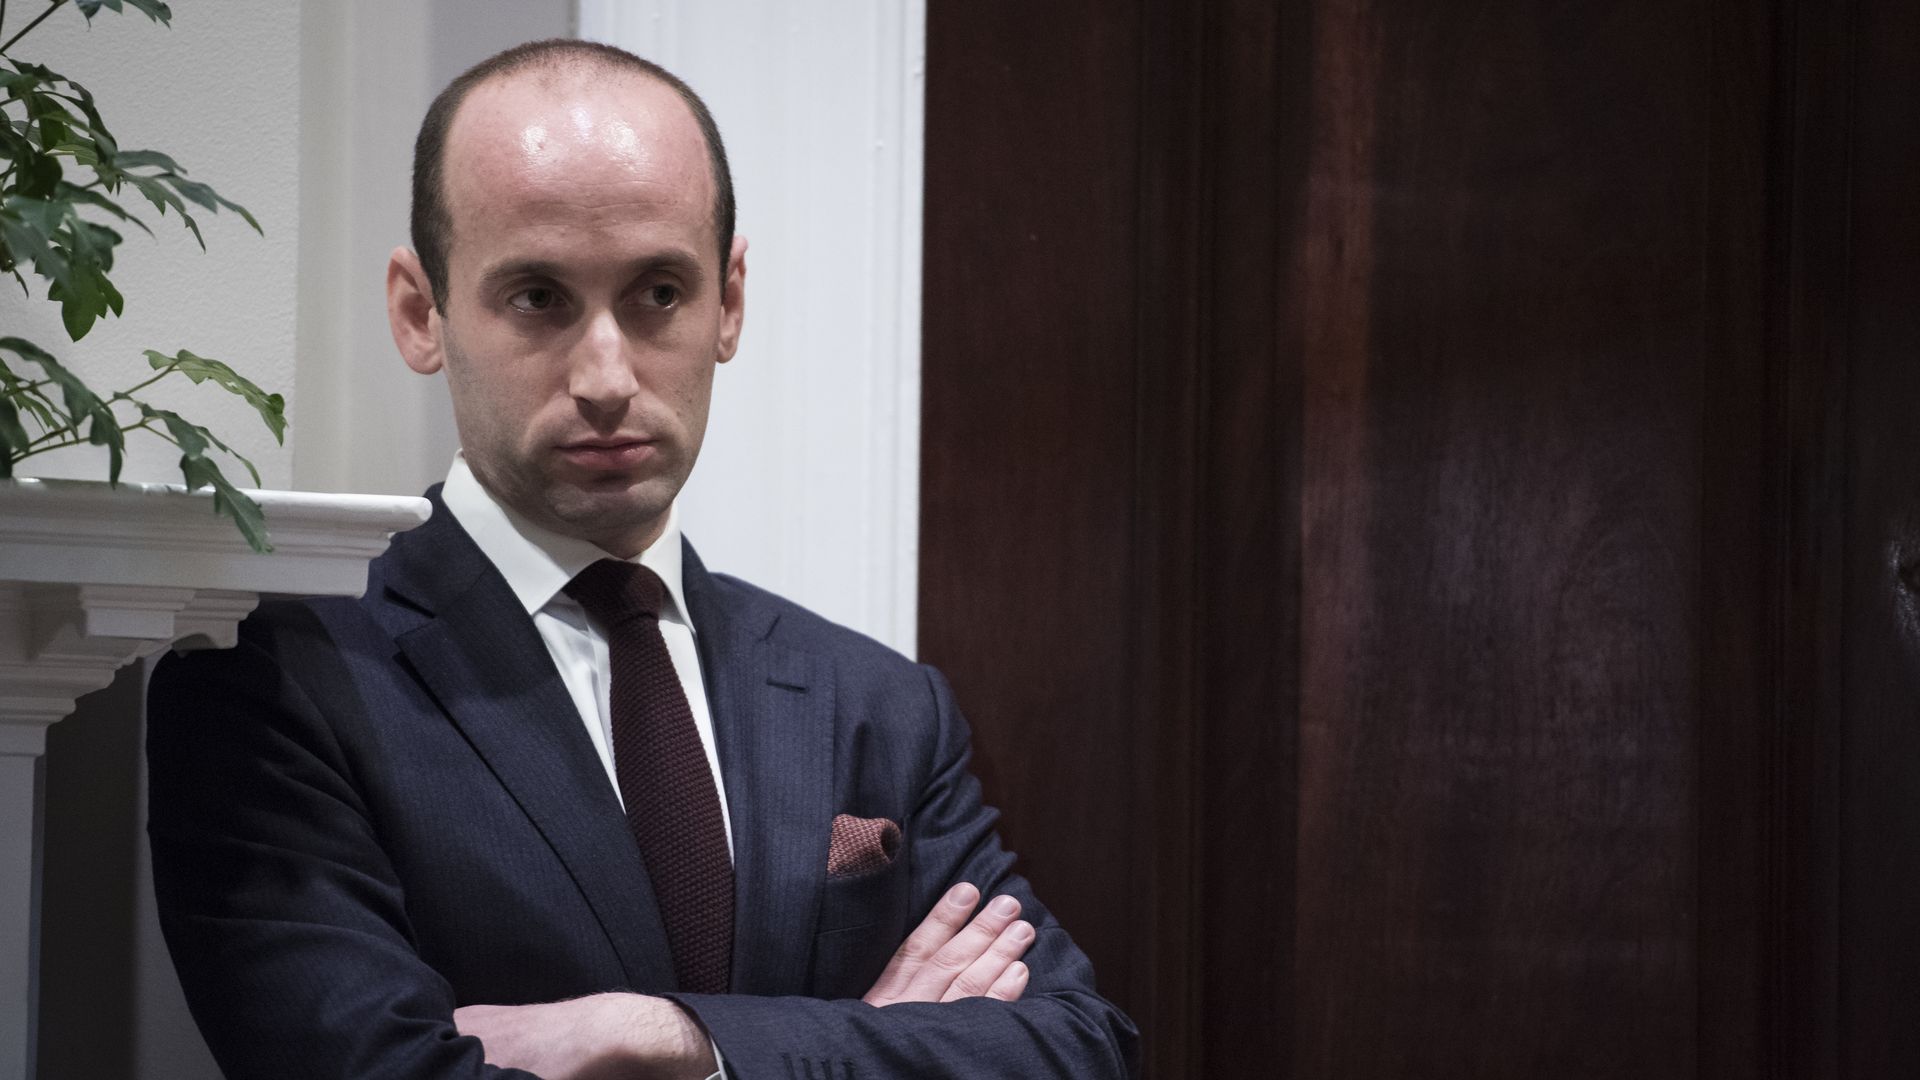 Group says Stephen Miller shared story ideas on race, immigration with  Breitbart